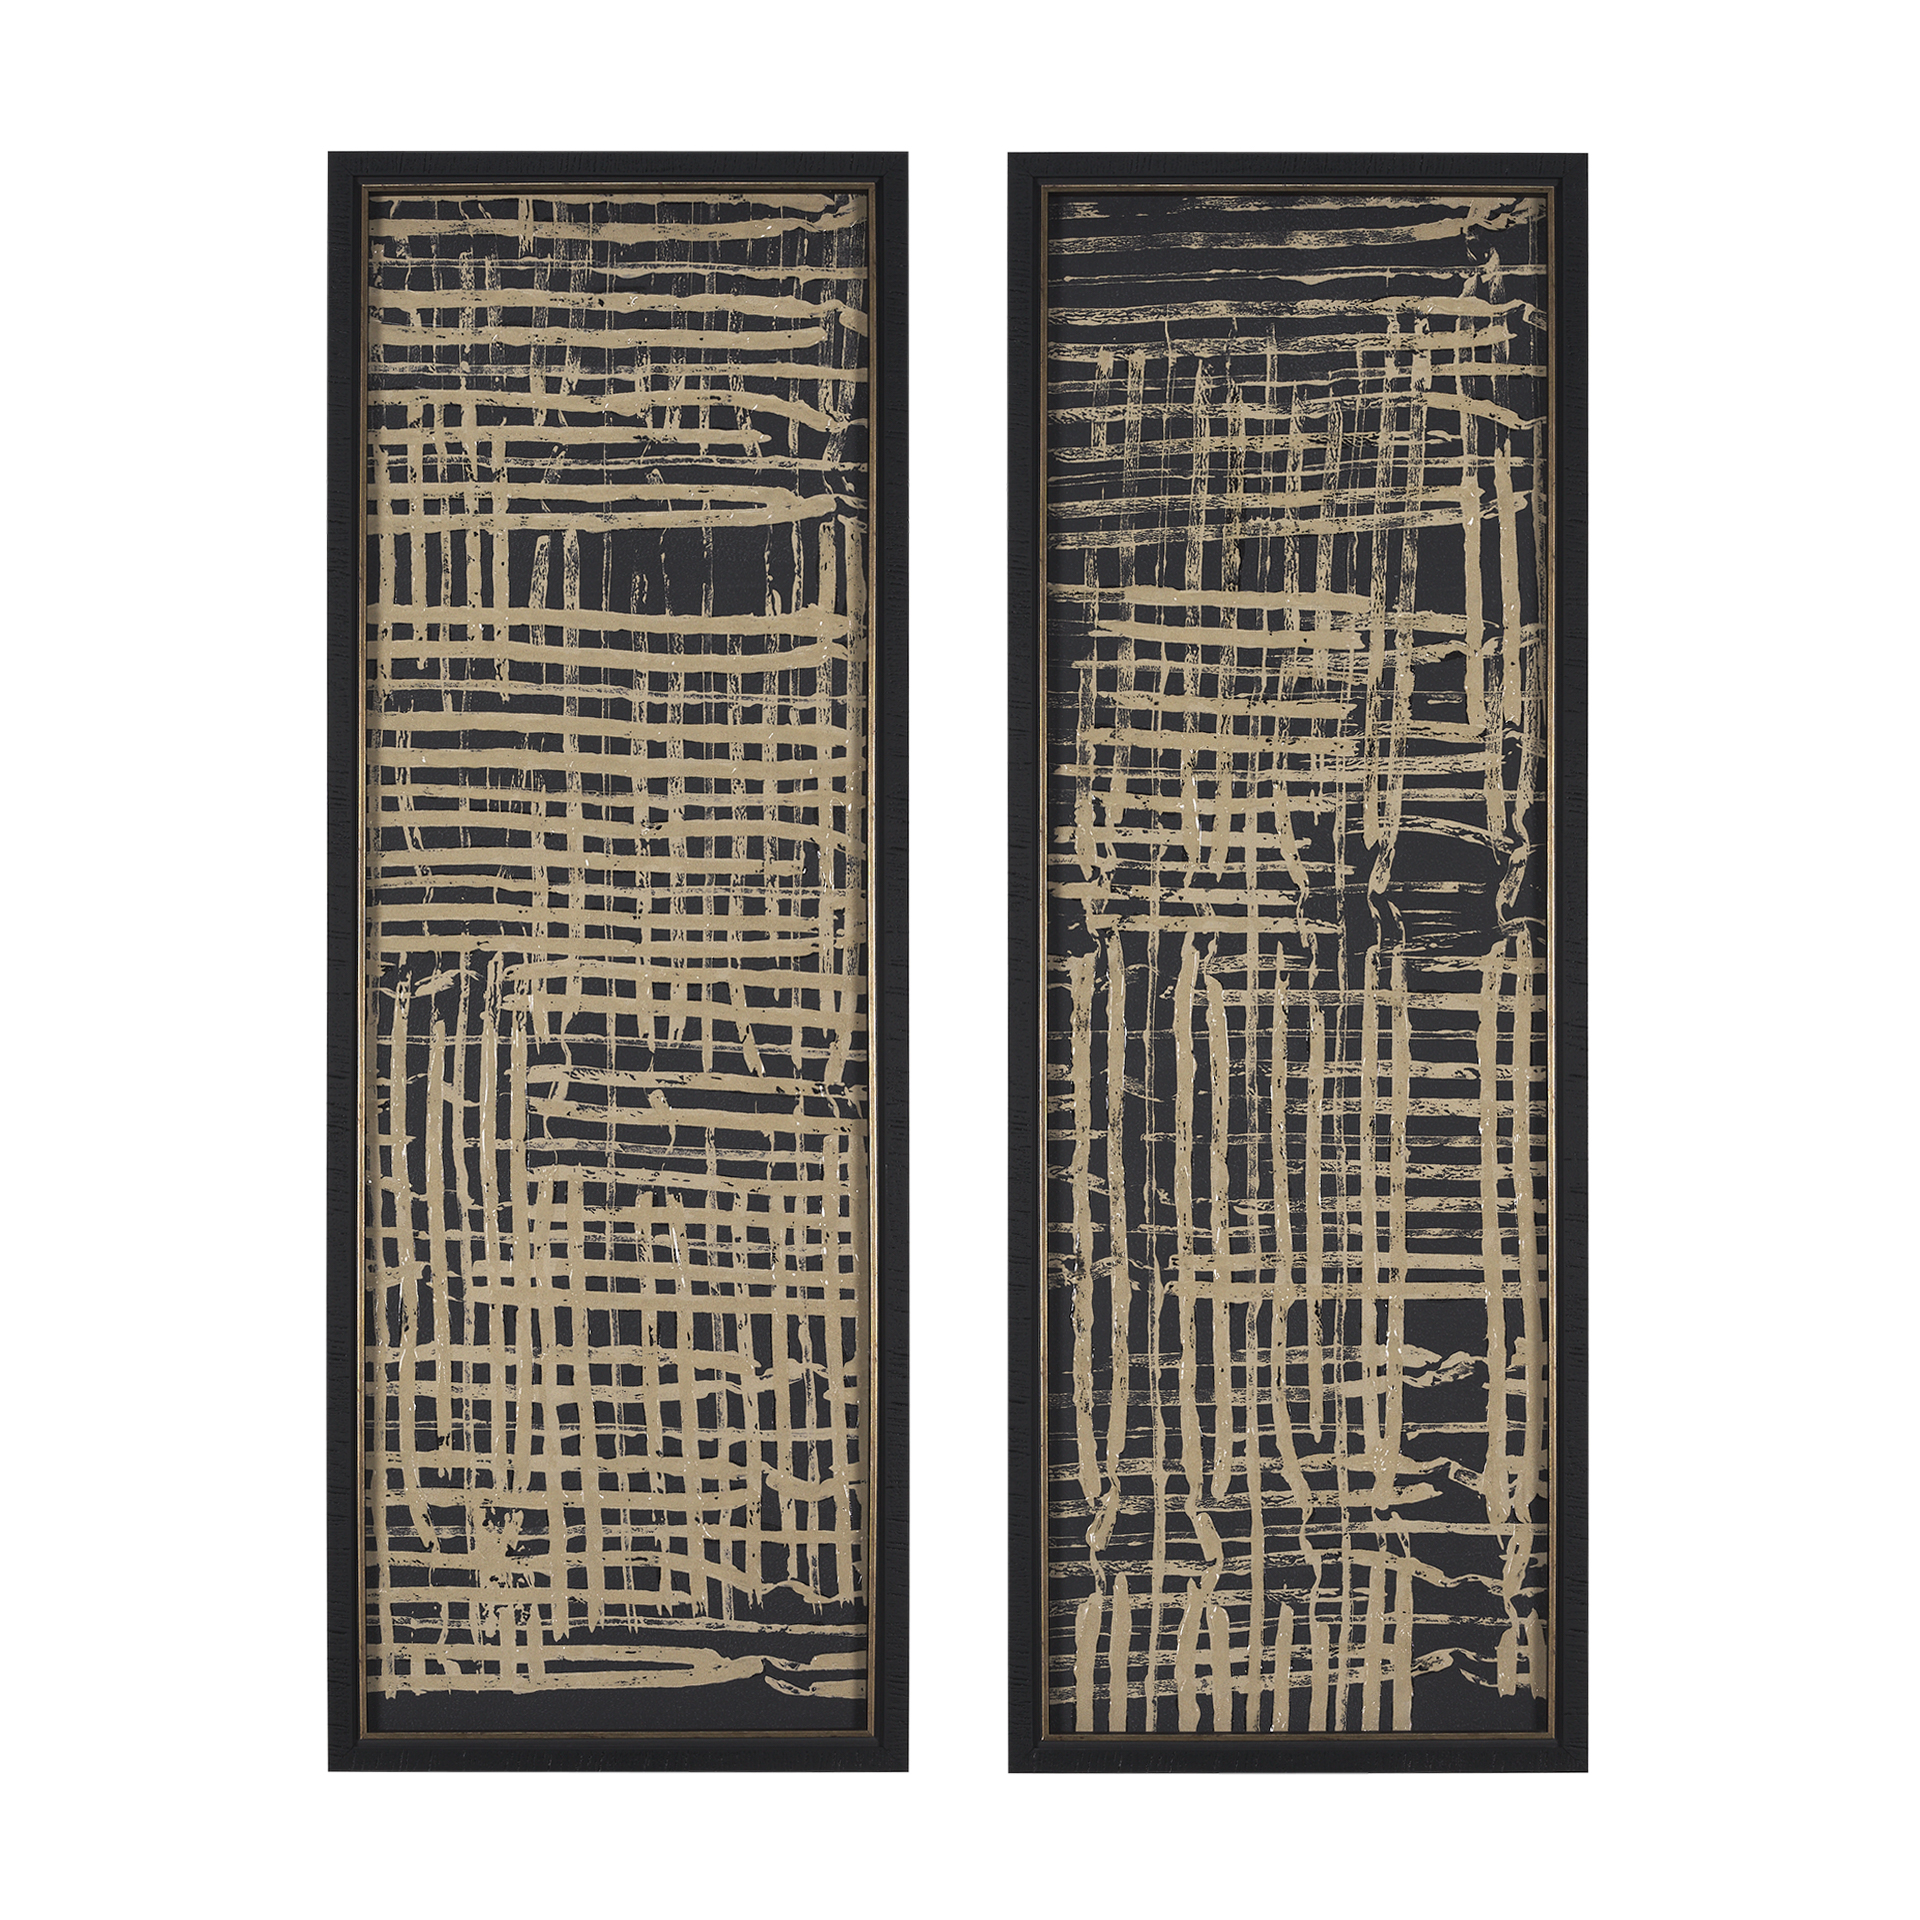 Woven Lines Tan (Set of 2)